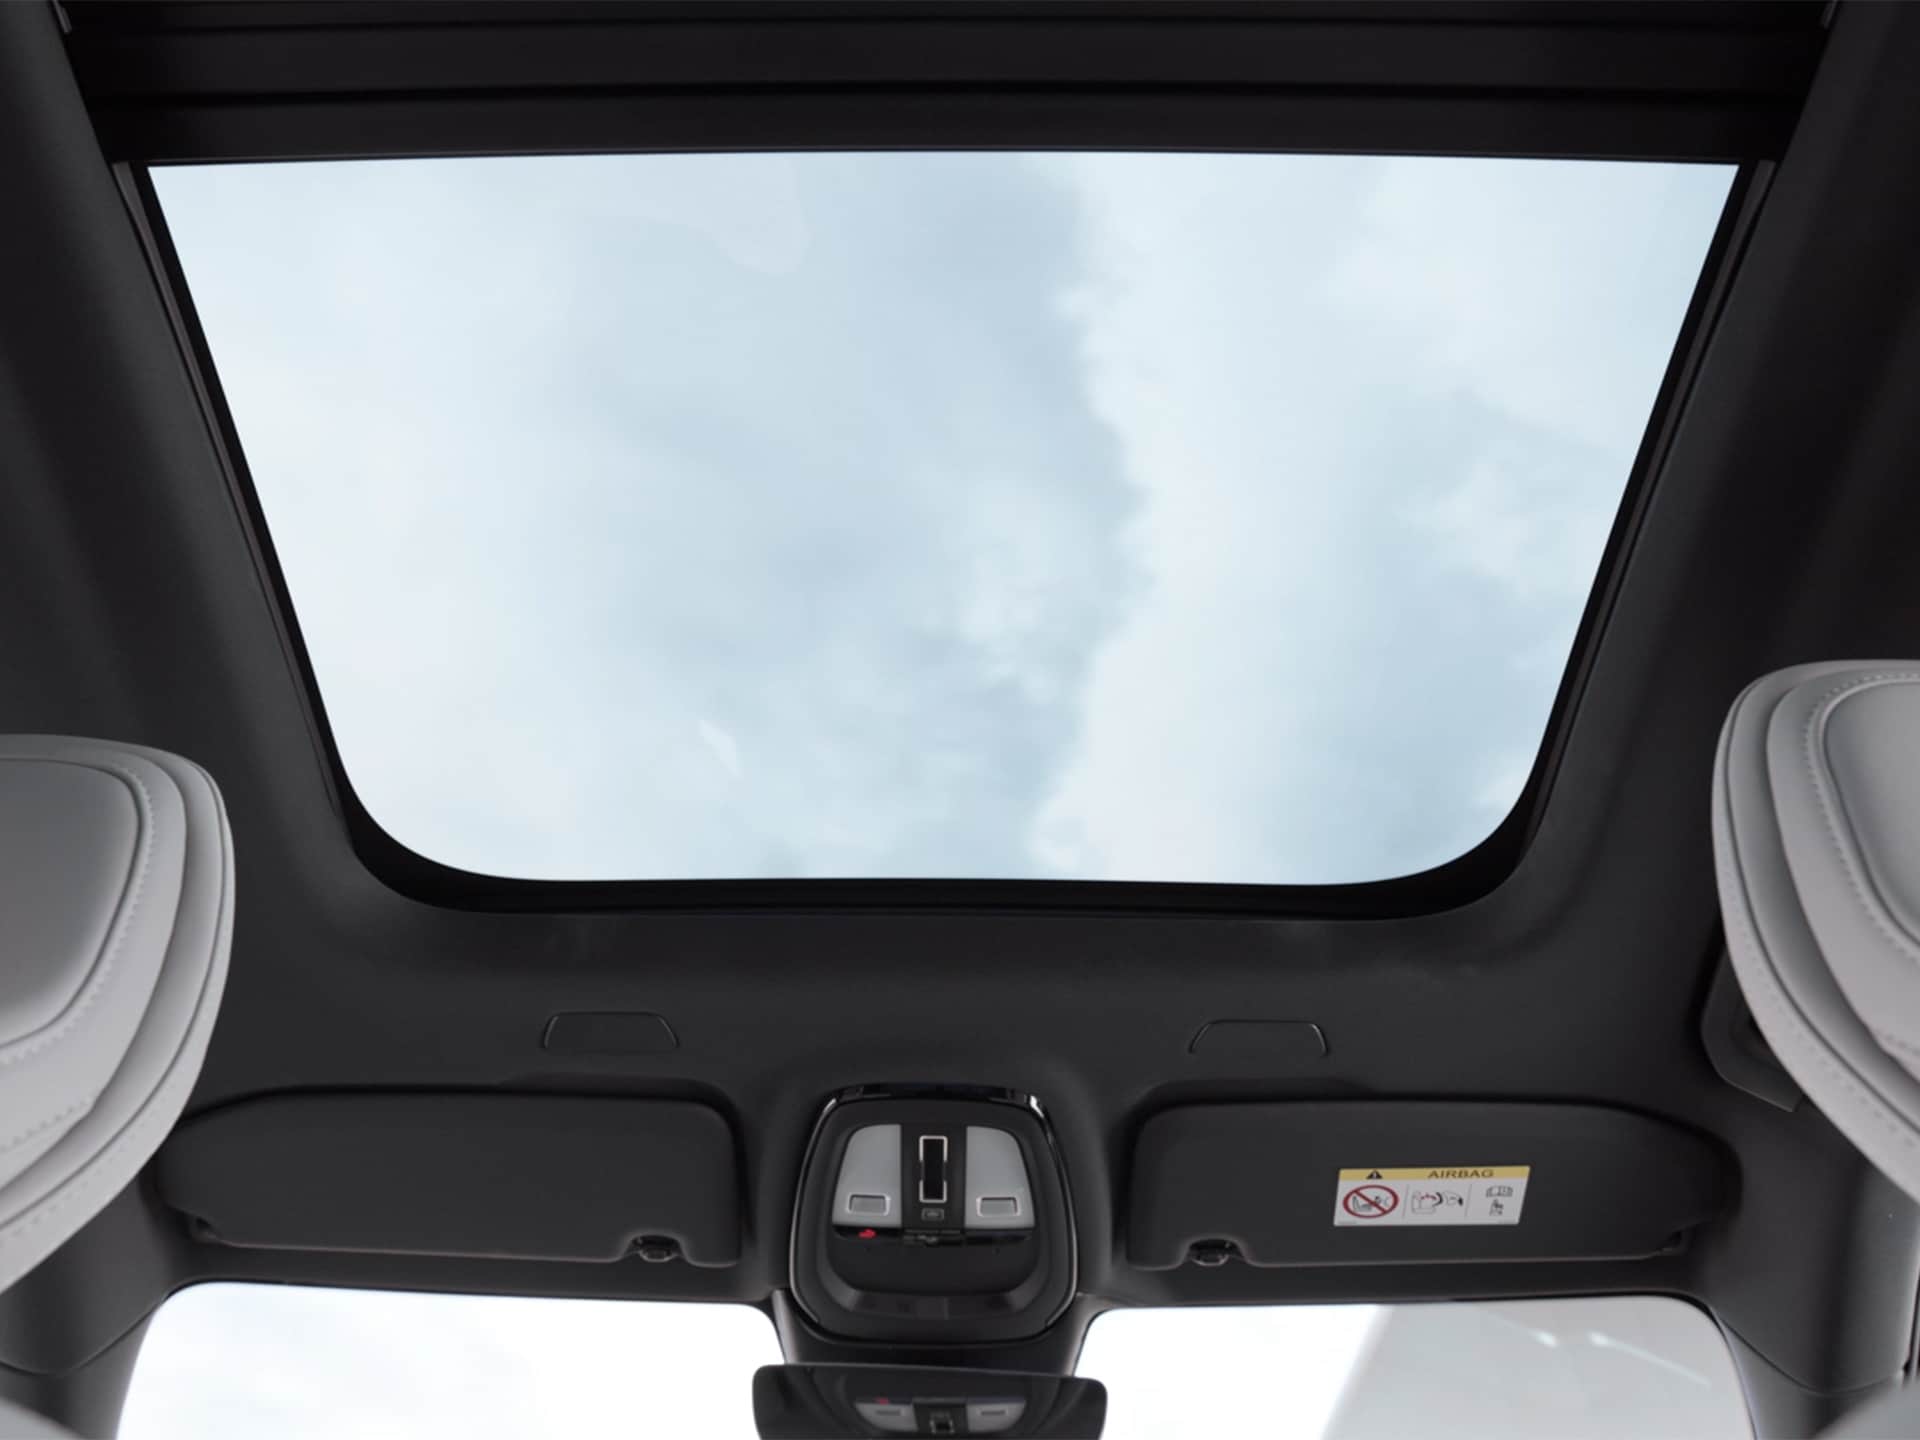 Panoramic roof on a Volvo V60 Cross Country.